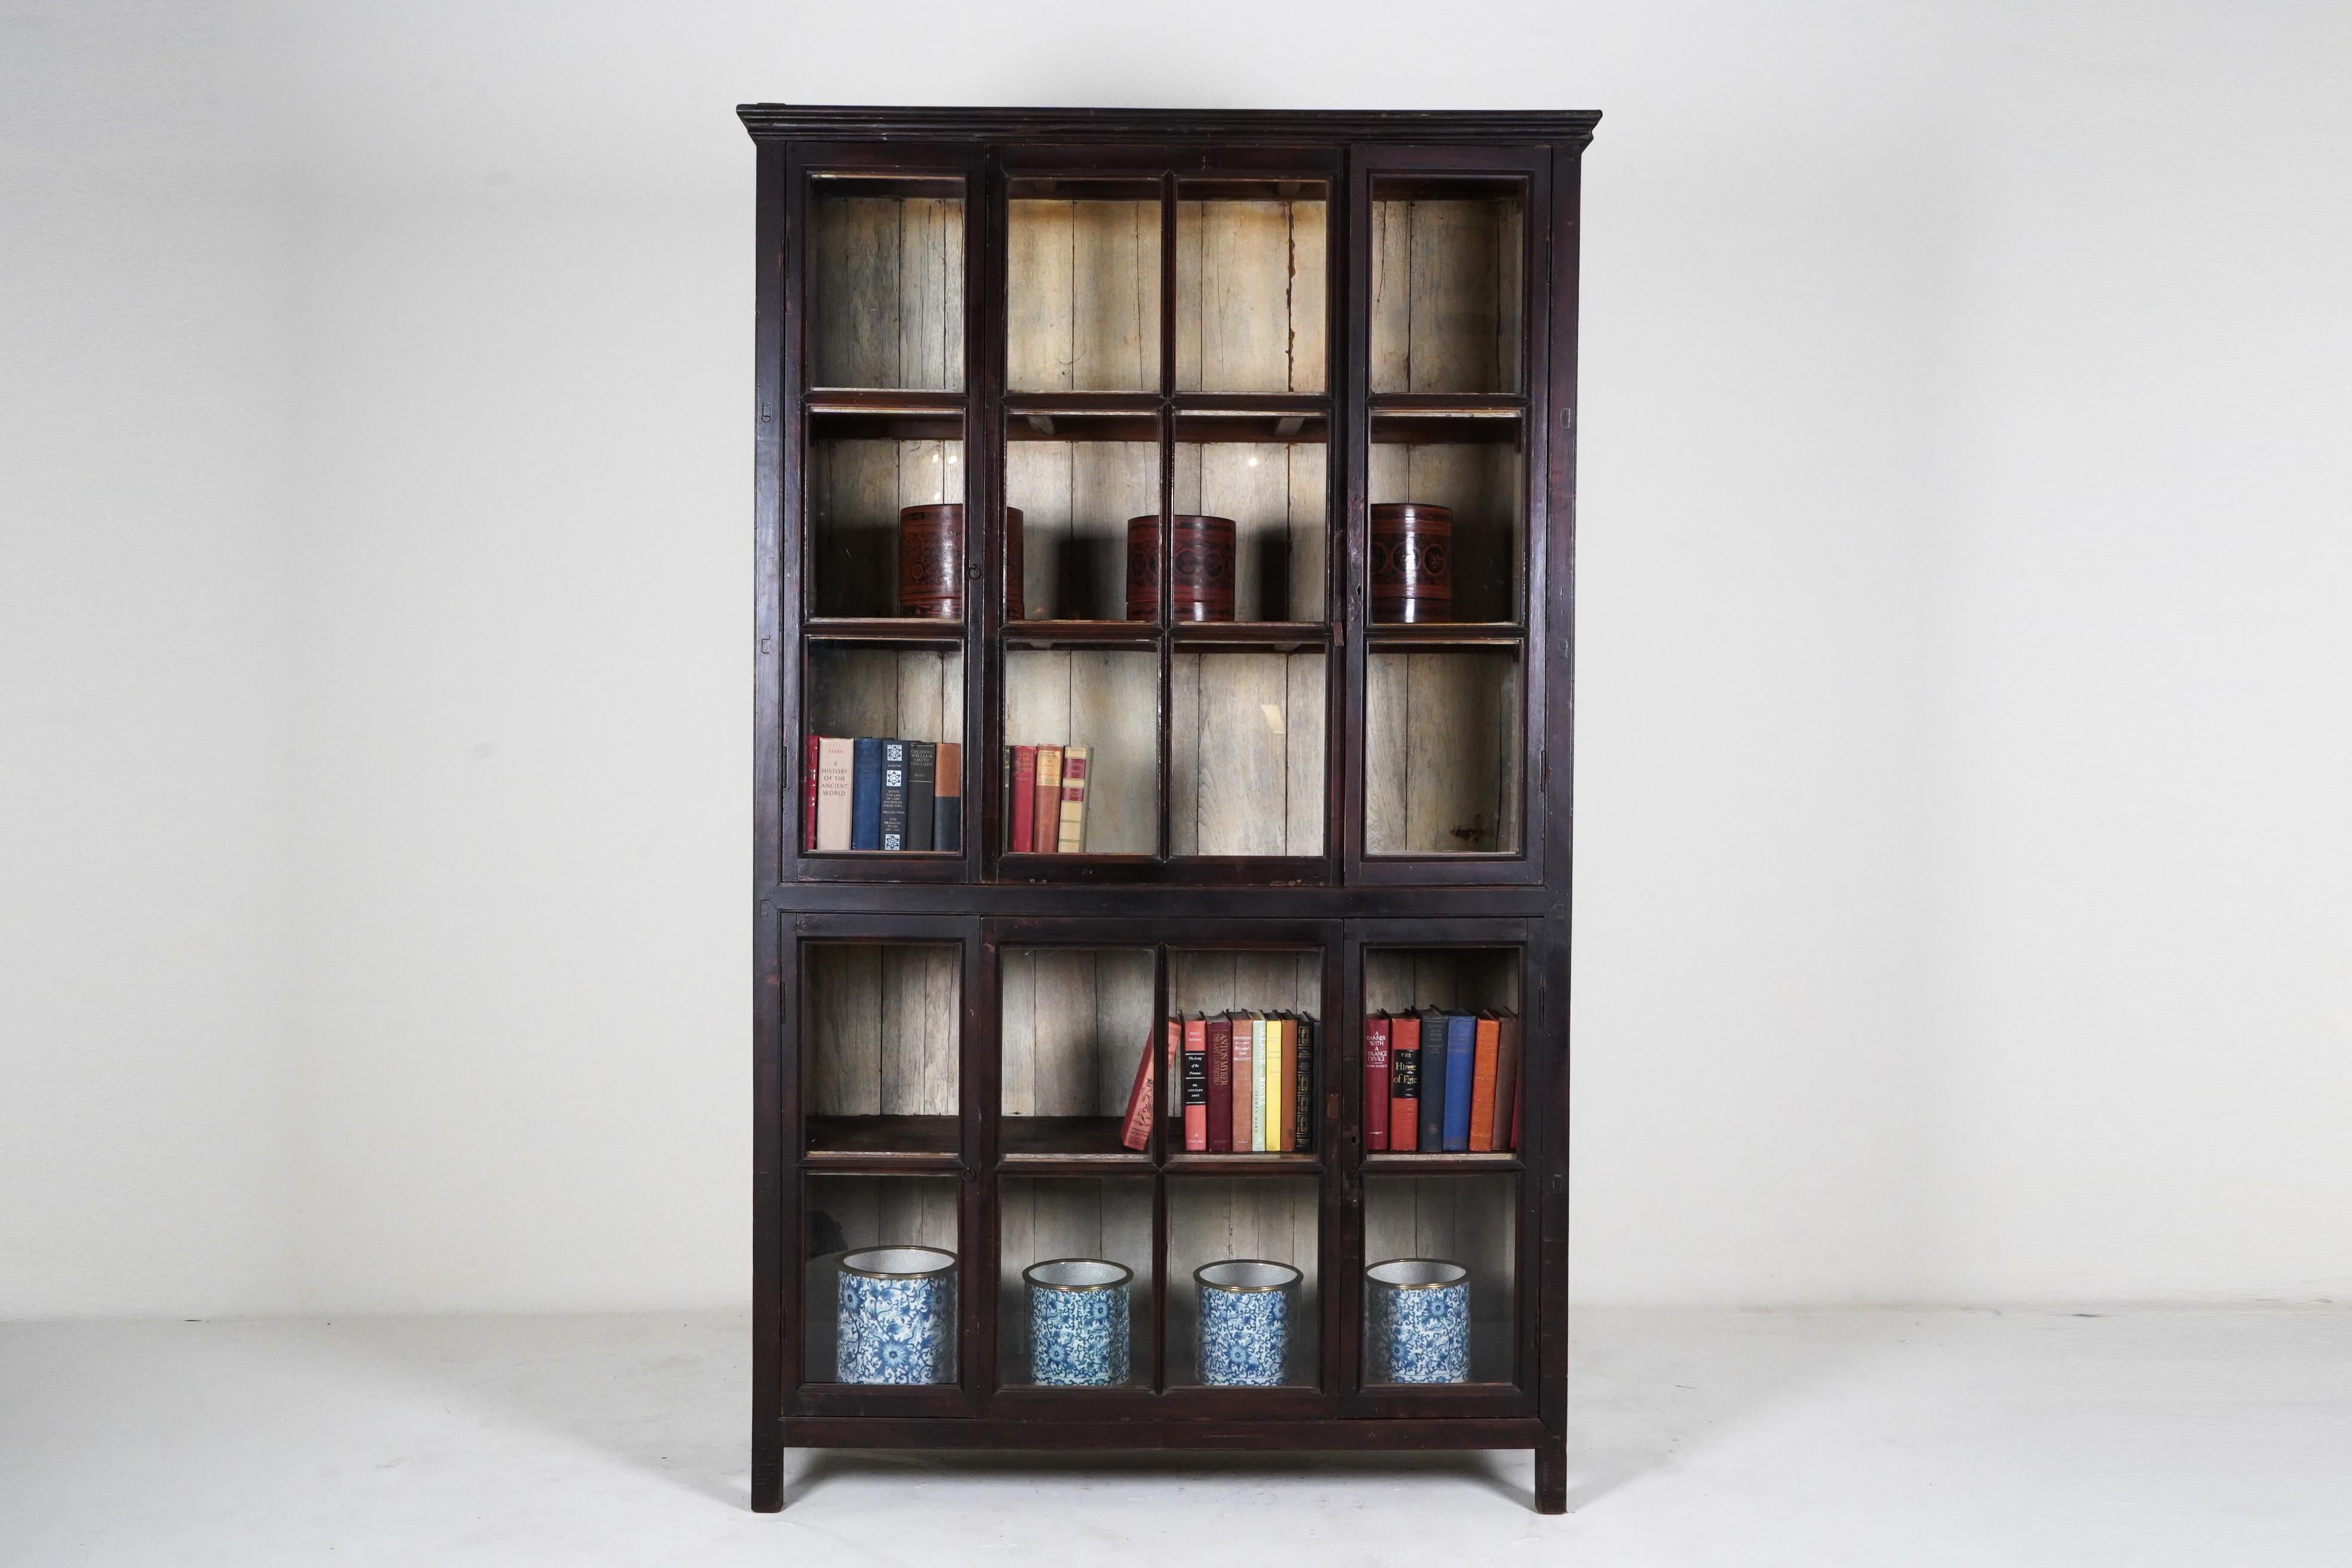 This large antique book cabinet was made from solid teak wood, lacquered black and dates to the early 1900's. During the British Empire in India and Burma, much furniture was made in the Anglo-Indian style using native hardwoods and native